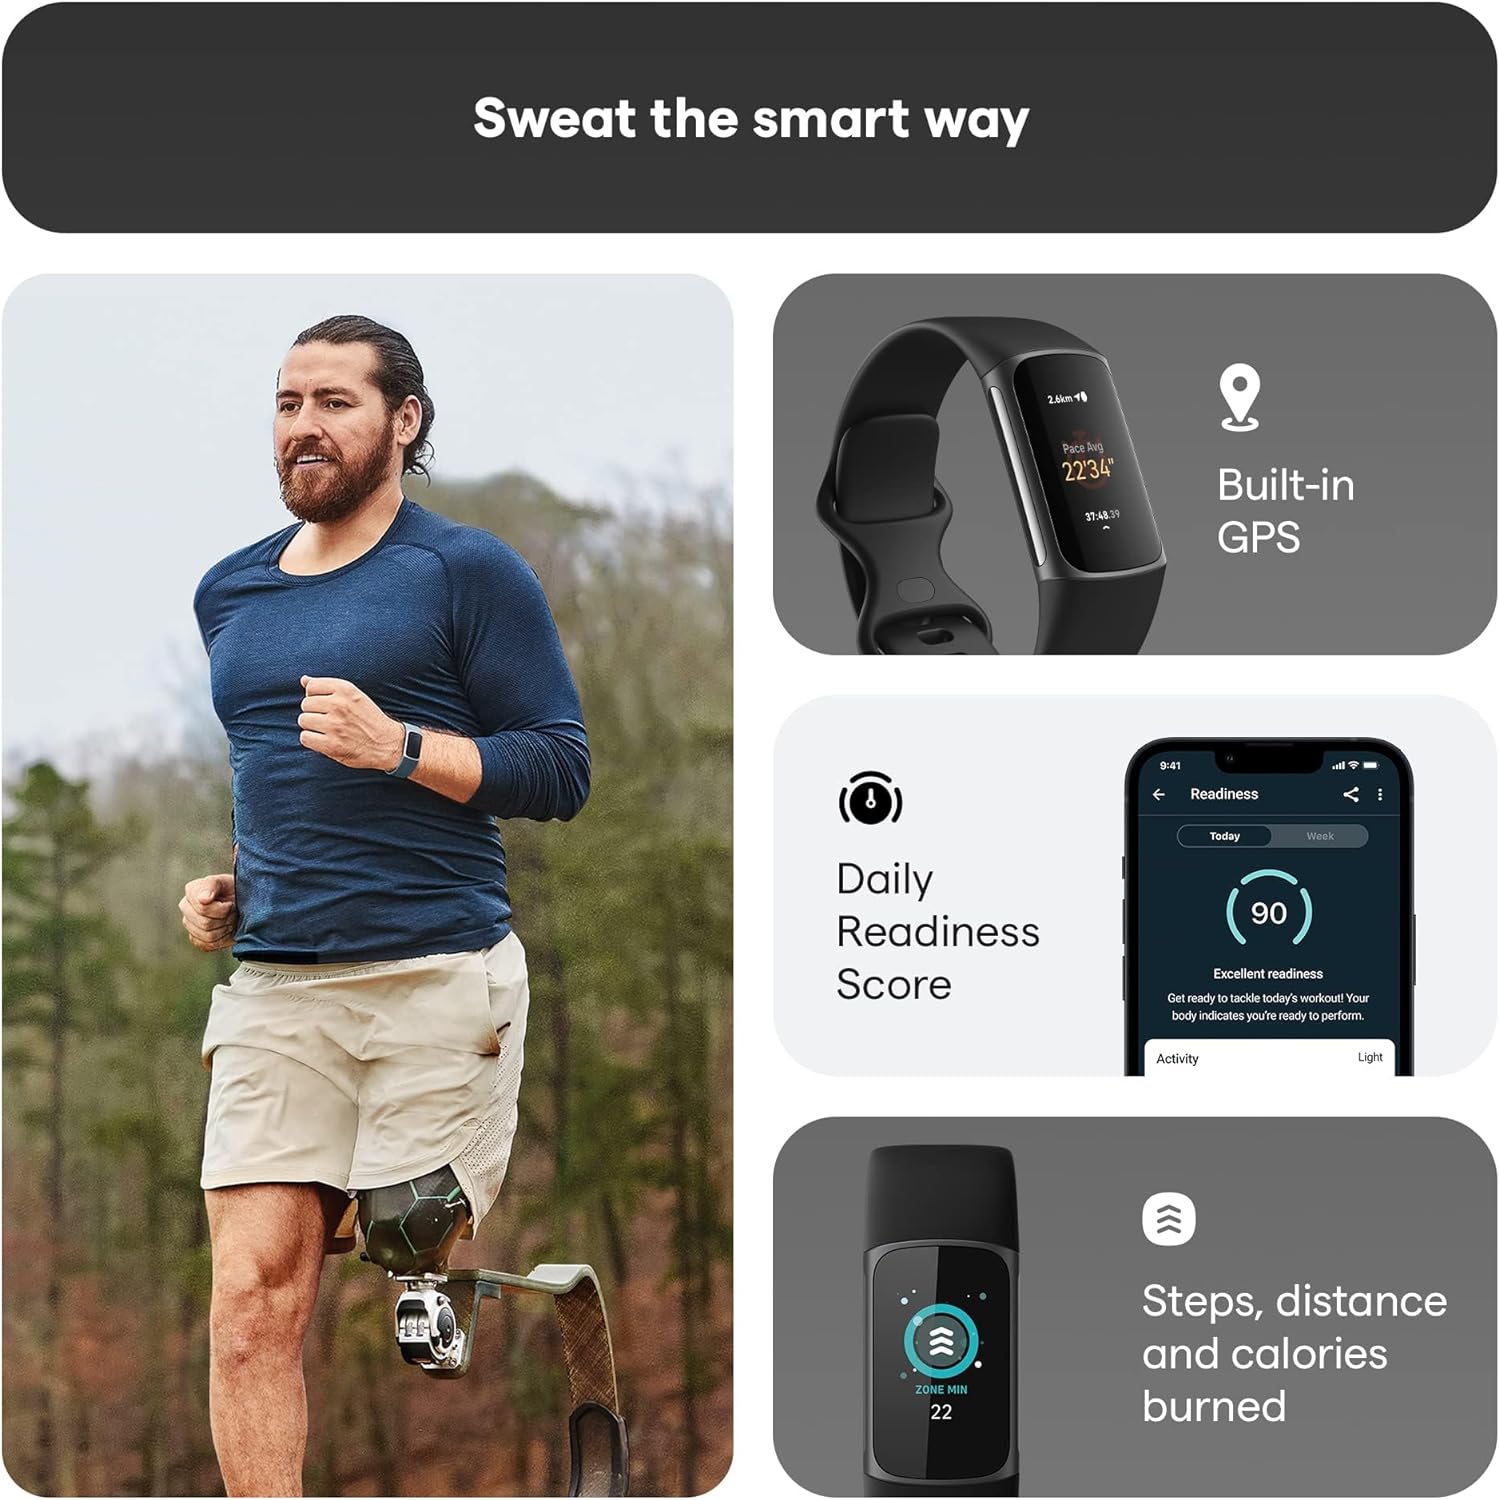 Fitbit Charge 5 Advanced Health  Fitness Tracker with Built-in GPS, Stress Management Tools, Sleep Tracking, 24/7 Heart Rate and More, Black/Graphite, One Size (S L Bands Included)